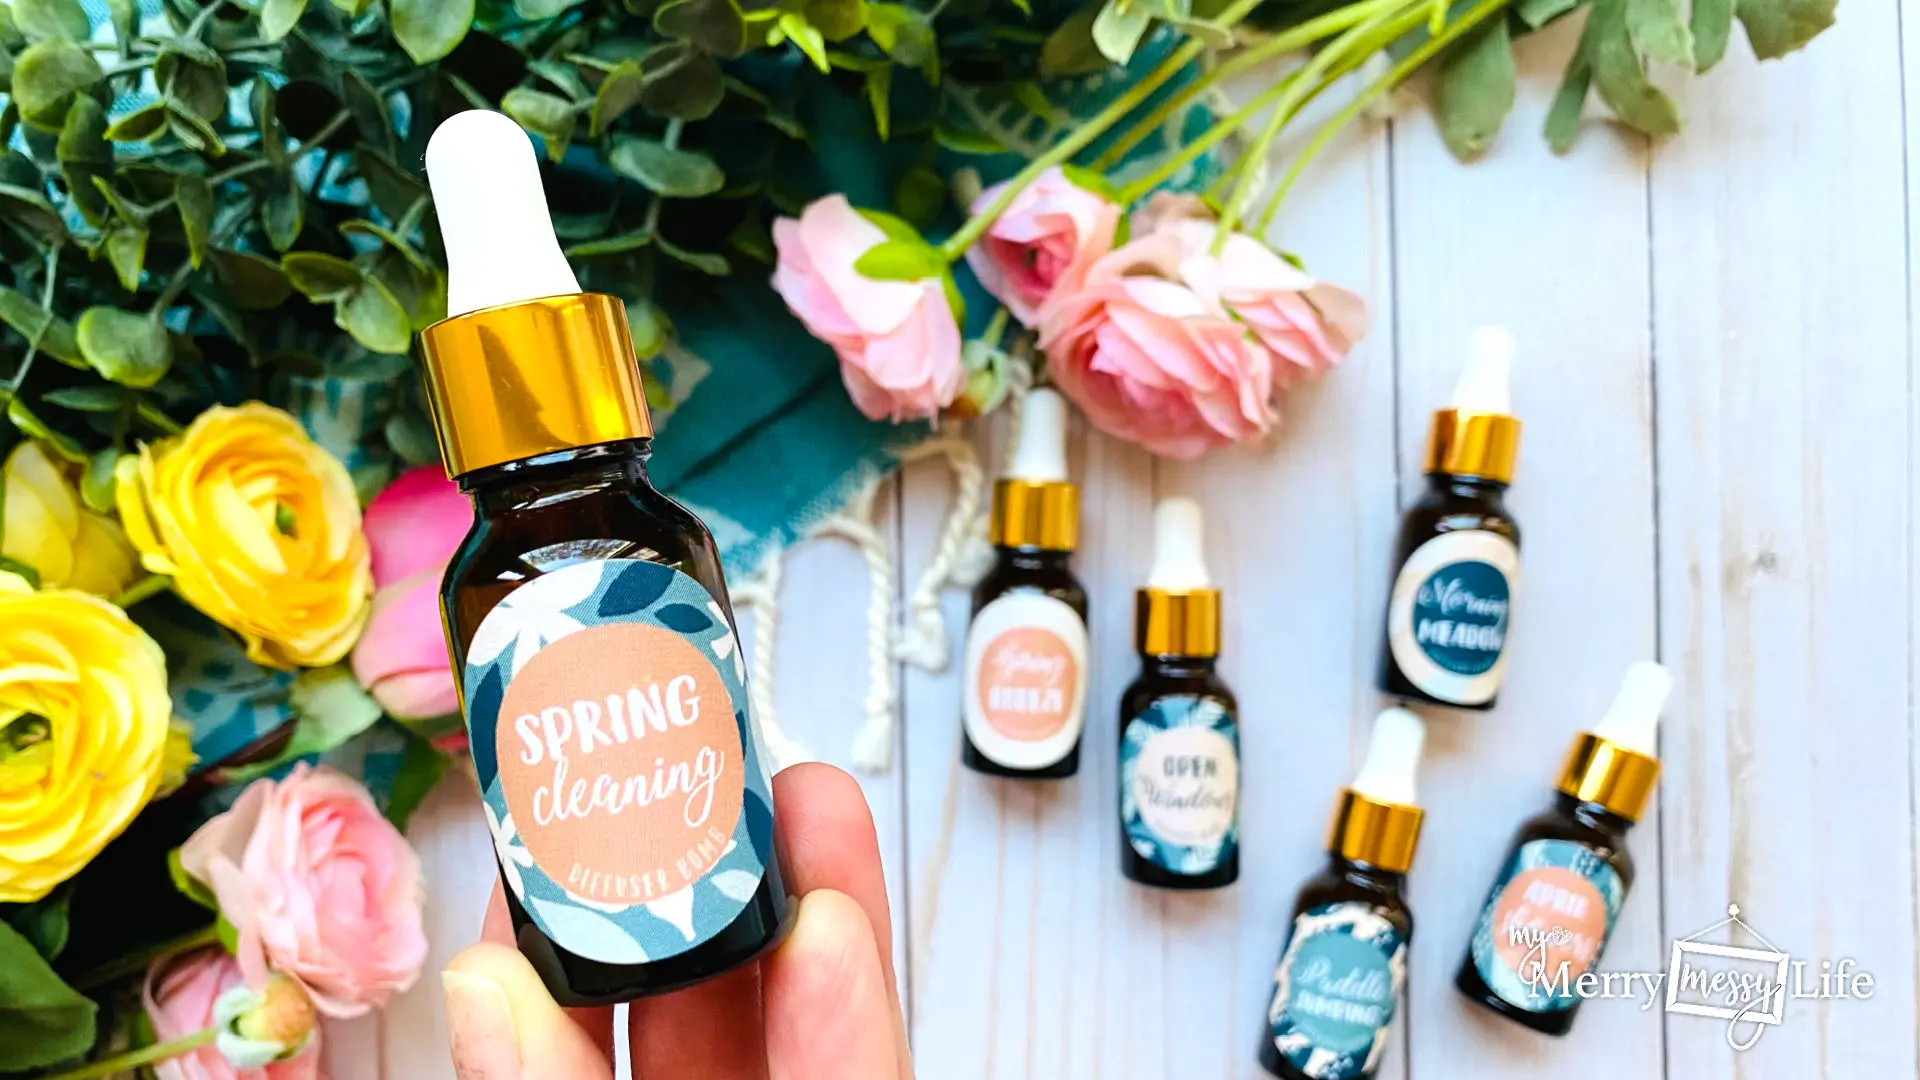 Spring Cleaning Recipe using pure essential oils - labels sold on Etsy